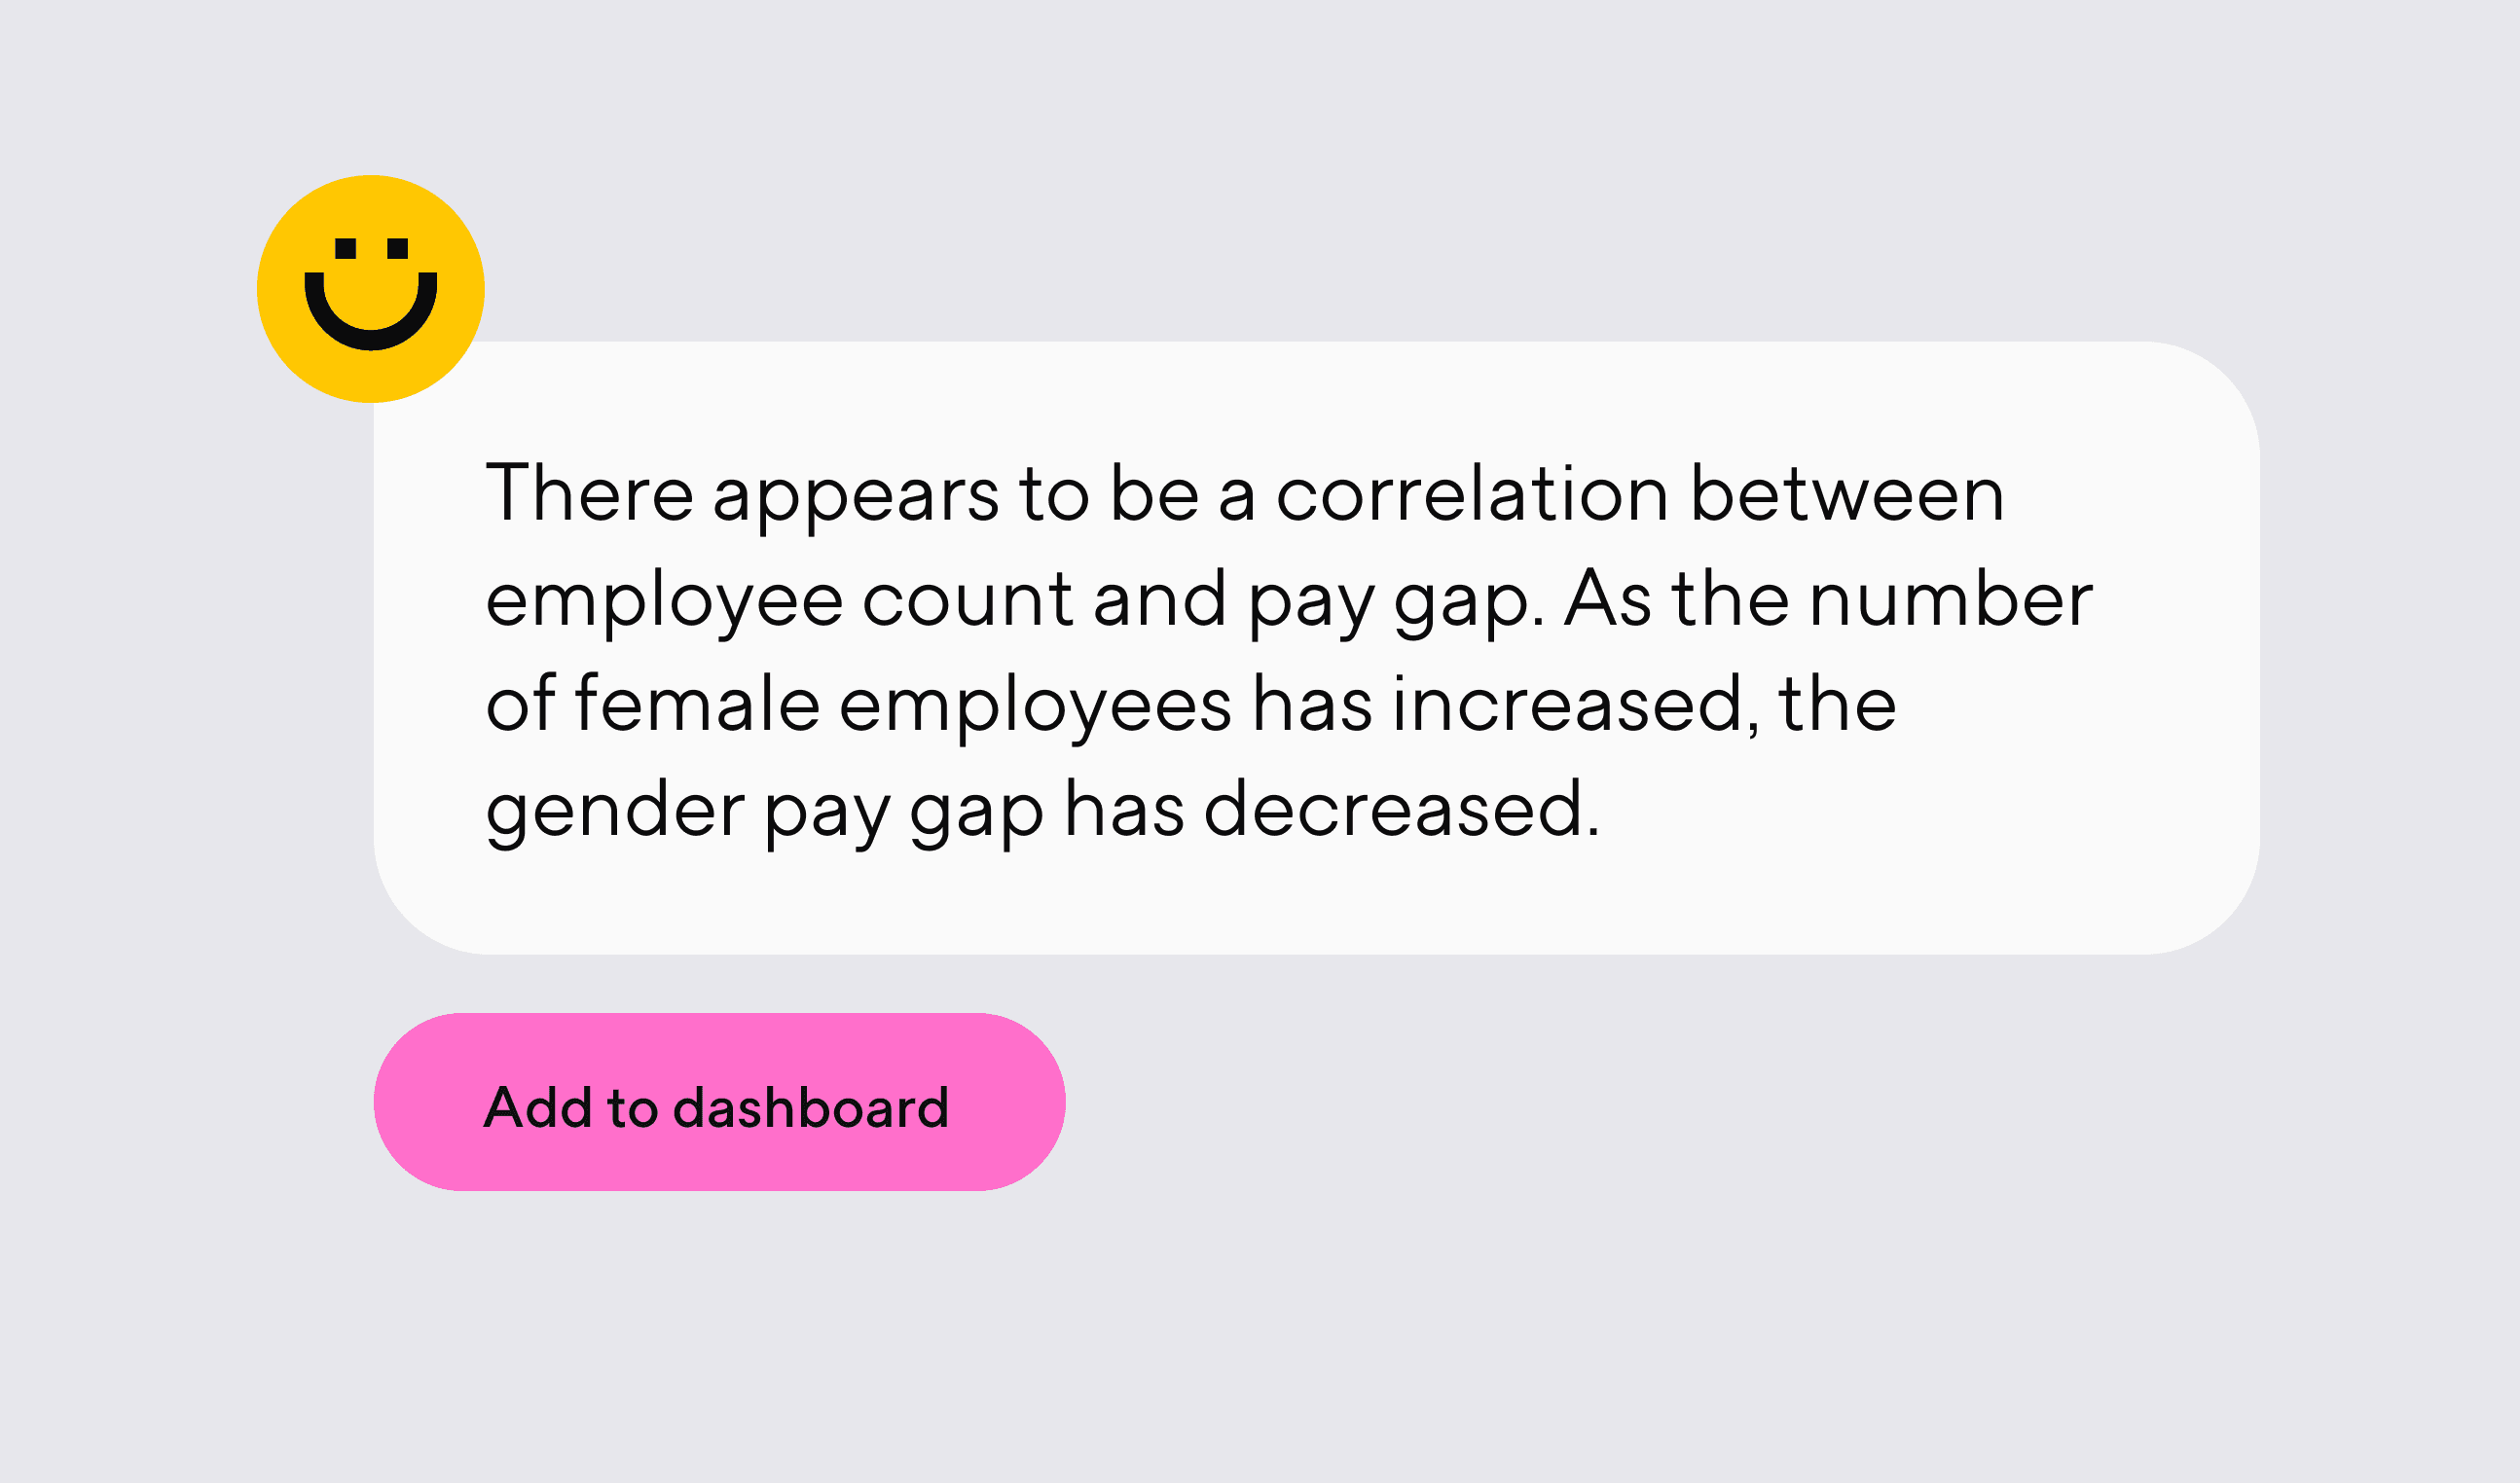 A text bubble has the Dandi smiley icon at the upper left and reads: There appears to be a correlation between employee count and pay gap. As the number of female employees has increased, the gender pay gap has decreased. A button below reads Add to dashboard.